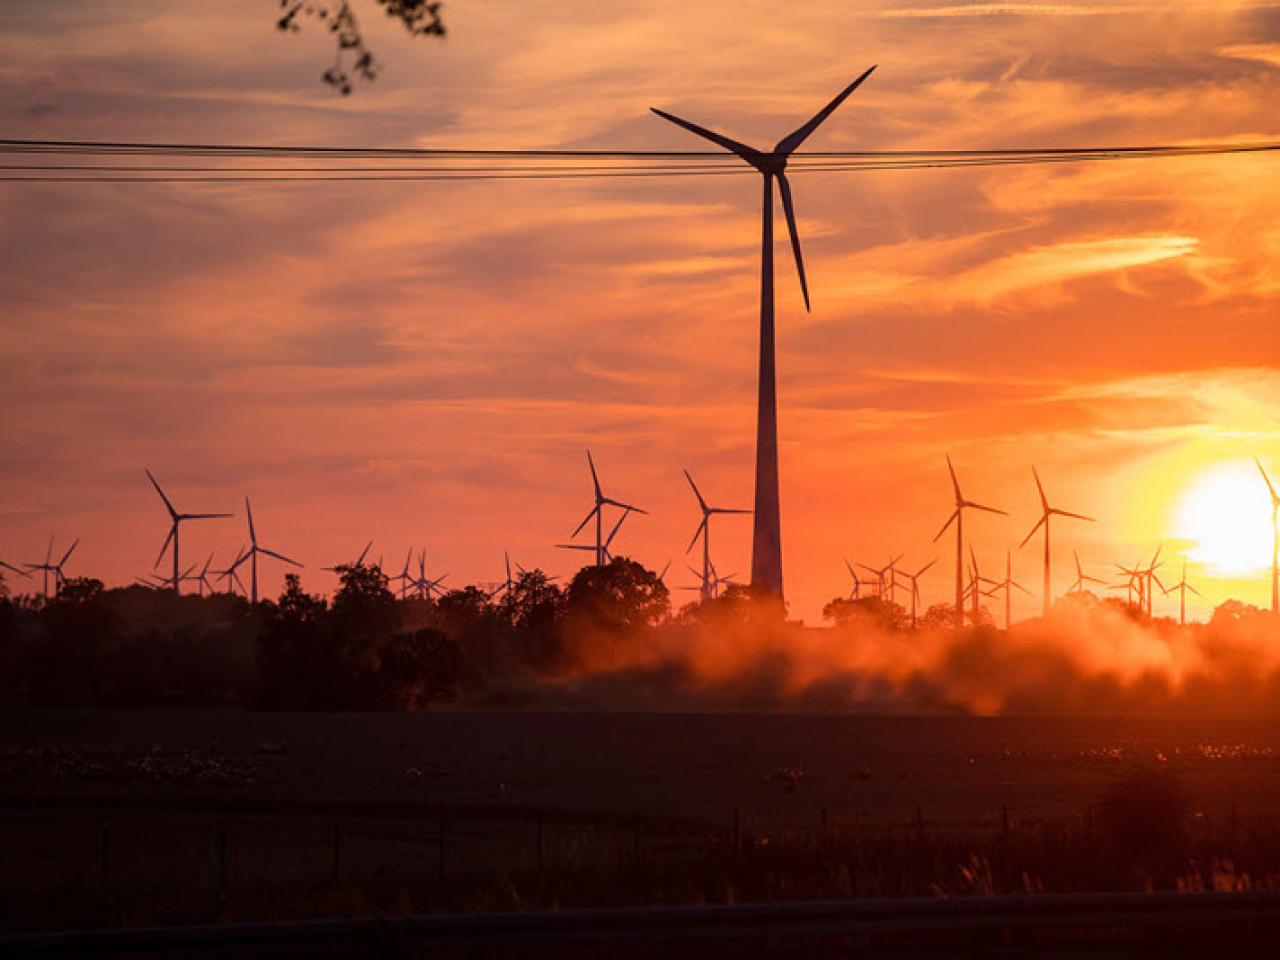 A sunsetting behind a large area with many wind turbines.